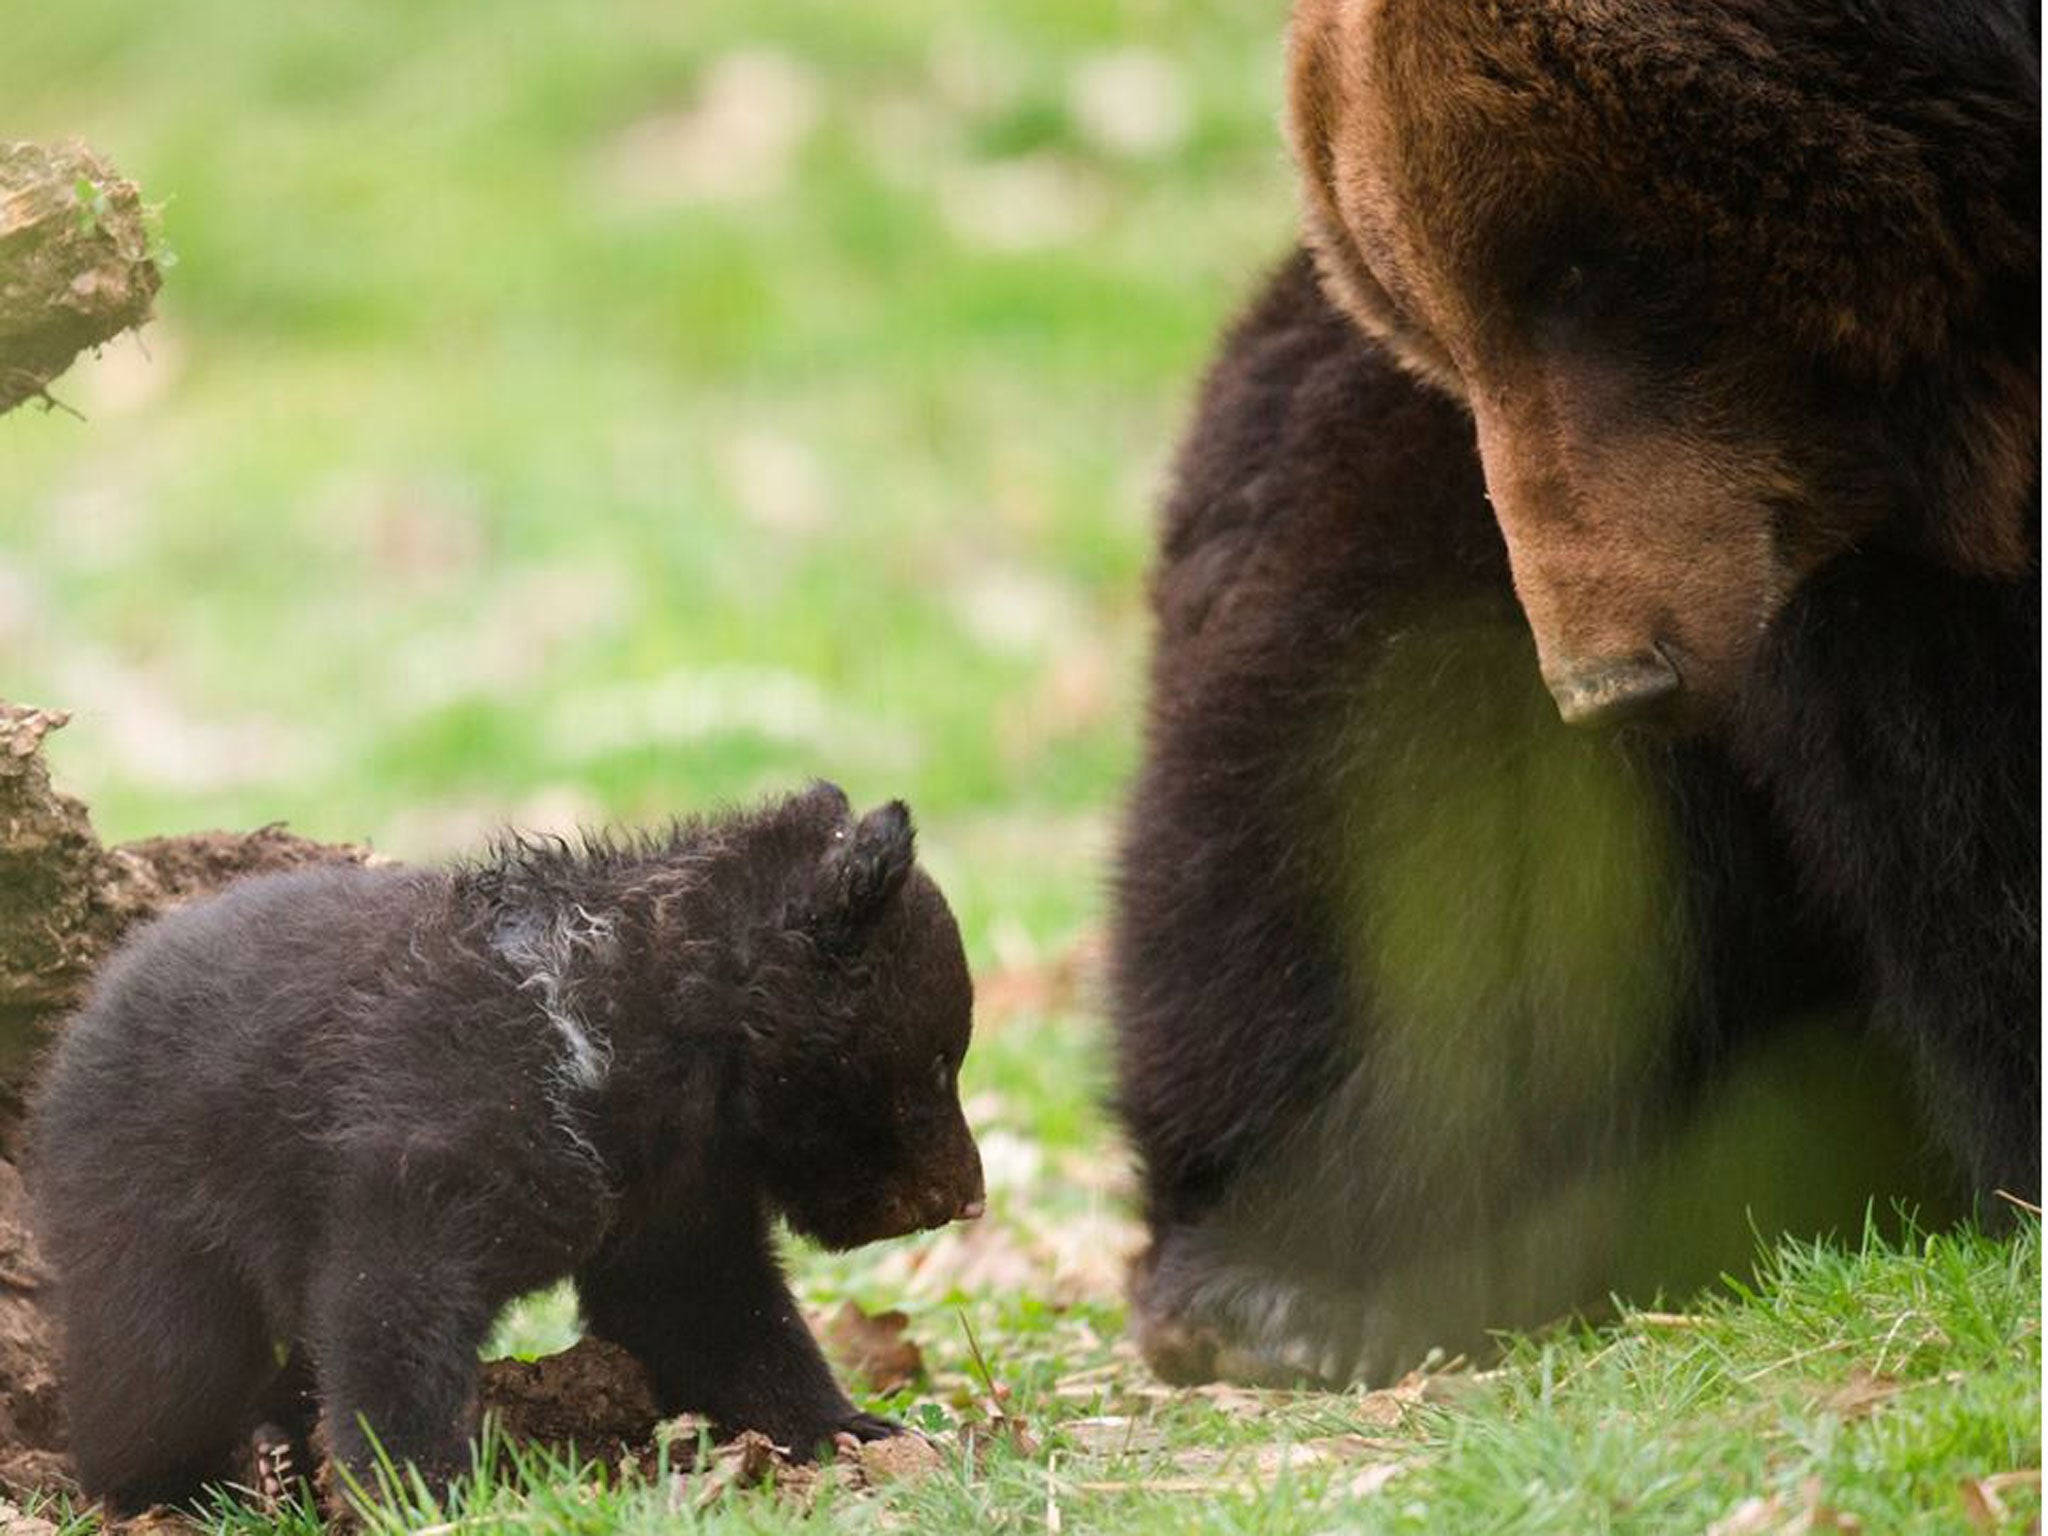 Swiss Dählhölzli zoo euthanised a healthy brown bear cub being bullied by father